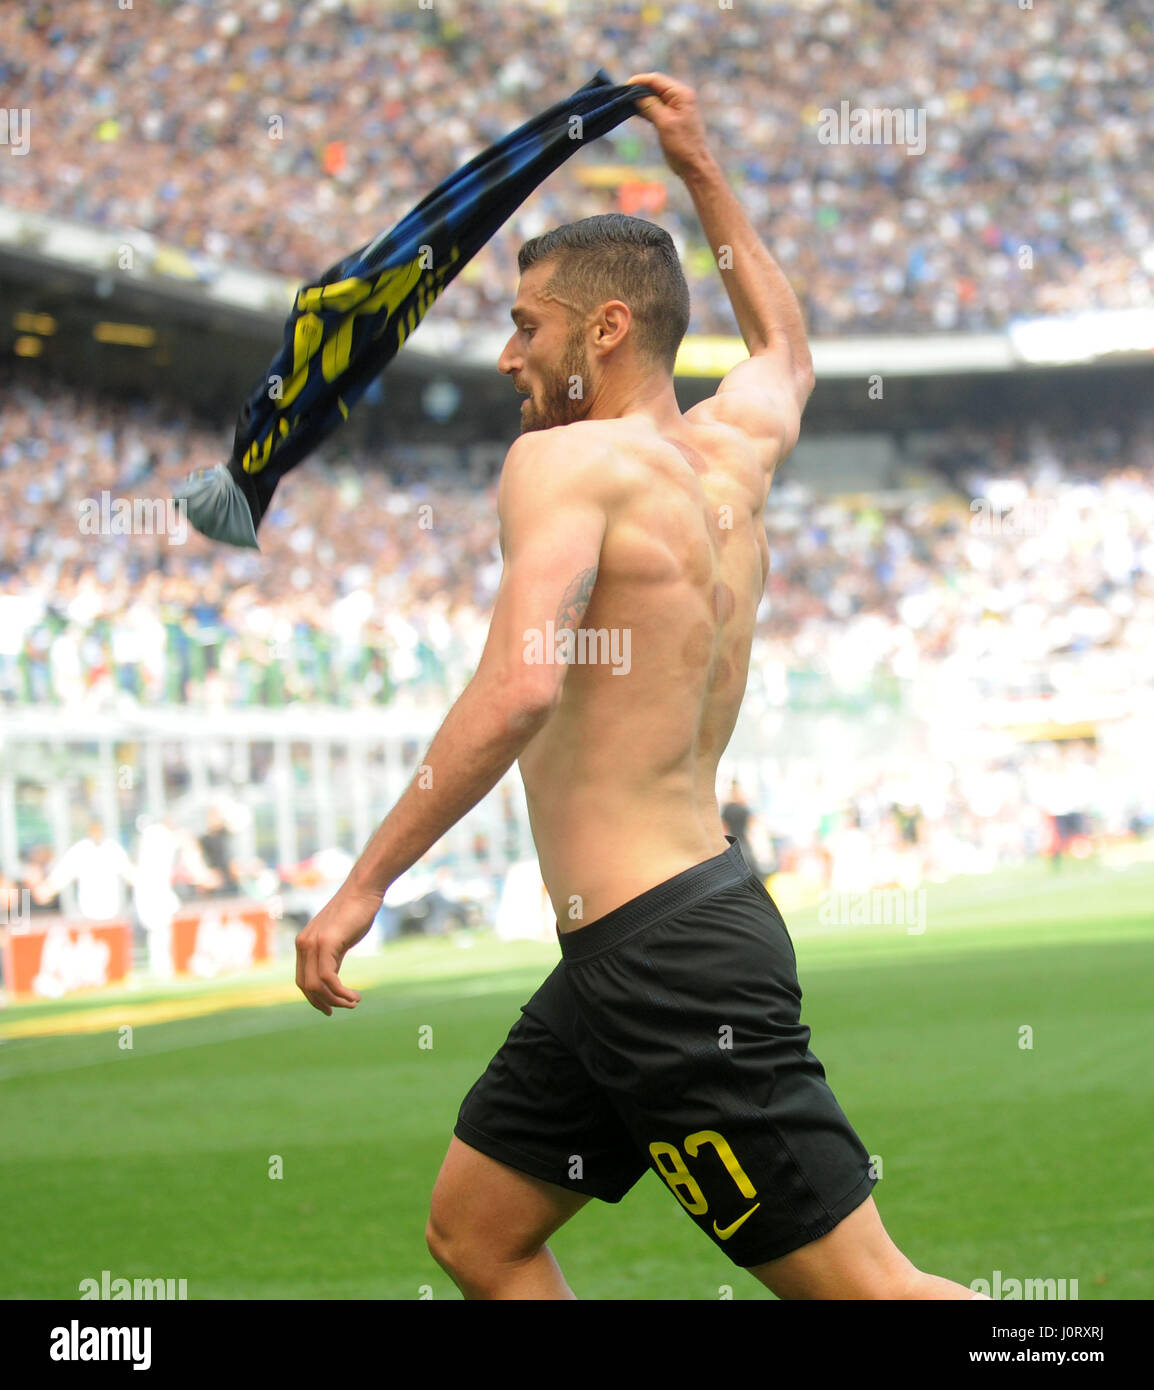 Milan, Italy. 15th Apr, 2017. Inter Milan's Antonio Candreva celebrates after he scores during a Serie A soccer match between AC Milan and Inter Milan, in Milan, Italy, April 15, 2017. The game ends with a 2-2 tie. Credit: Alberto Lingria/Xinhua/Alamy Live News Stock Photo